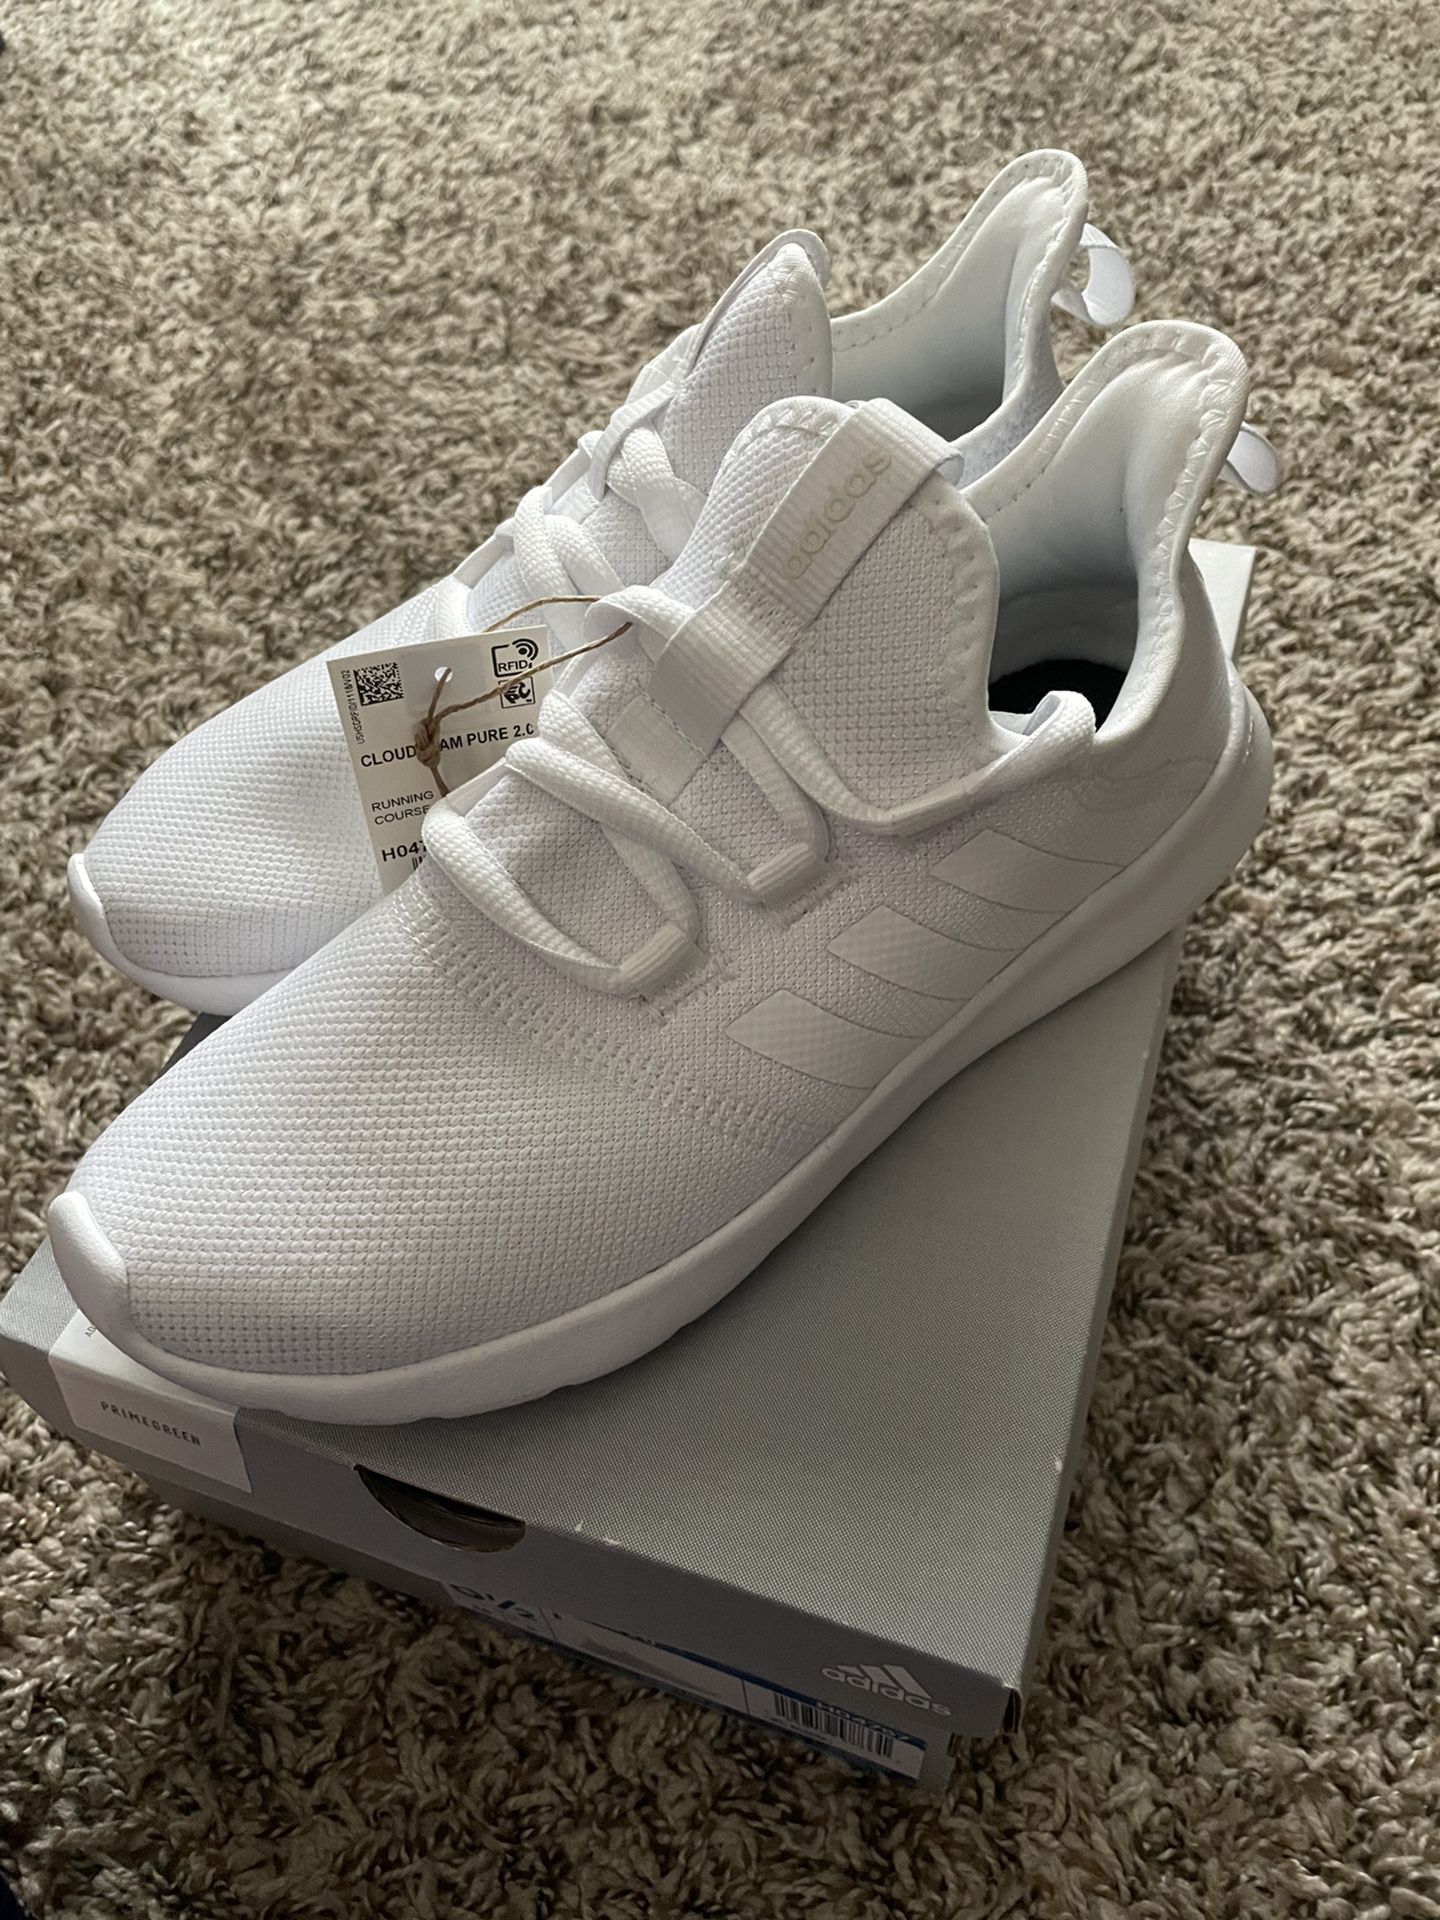 Step on Clouds with Adidas Cloudform 2.0 Size 6.5 for Sale in Palm Shores, FL - OfferUp